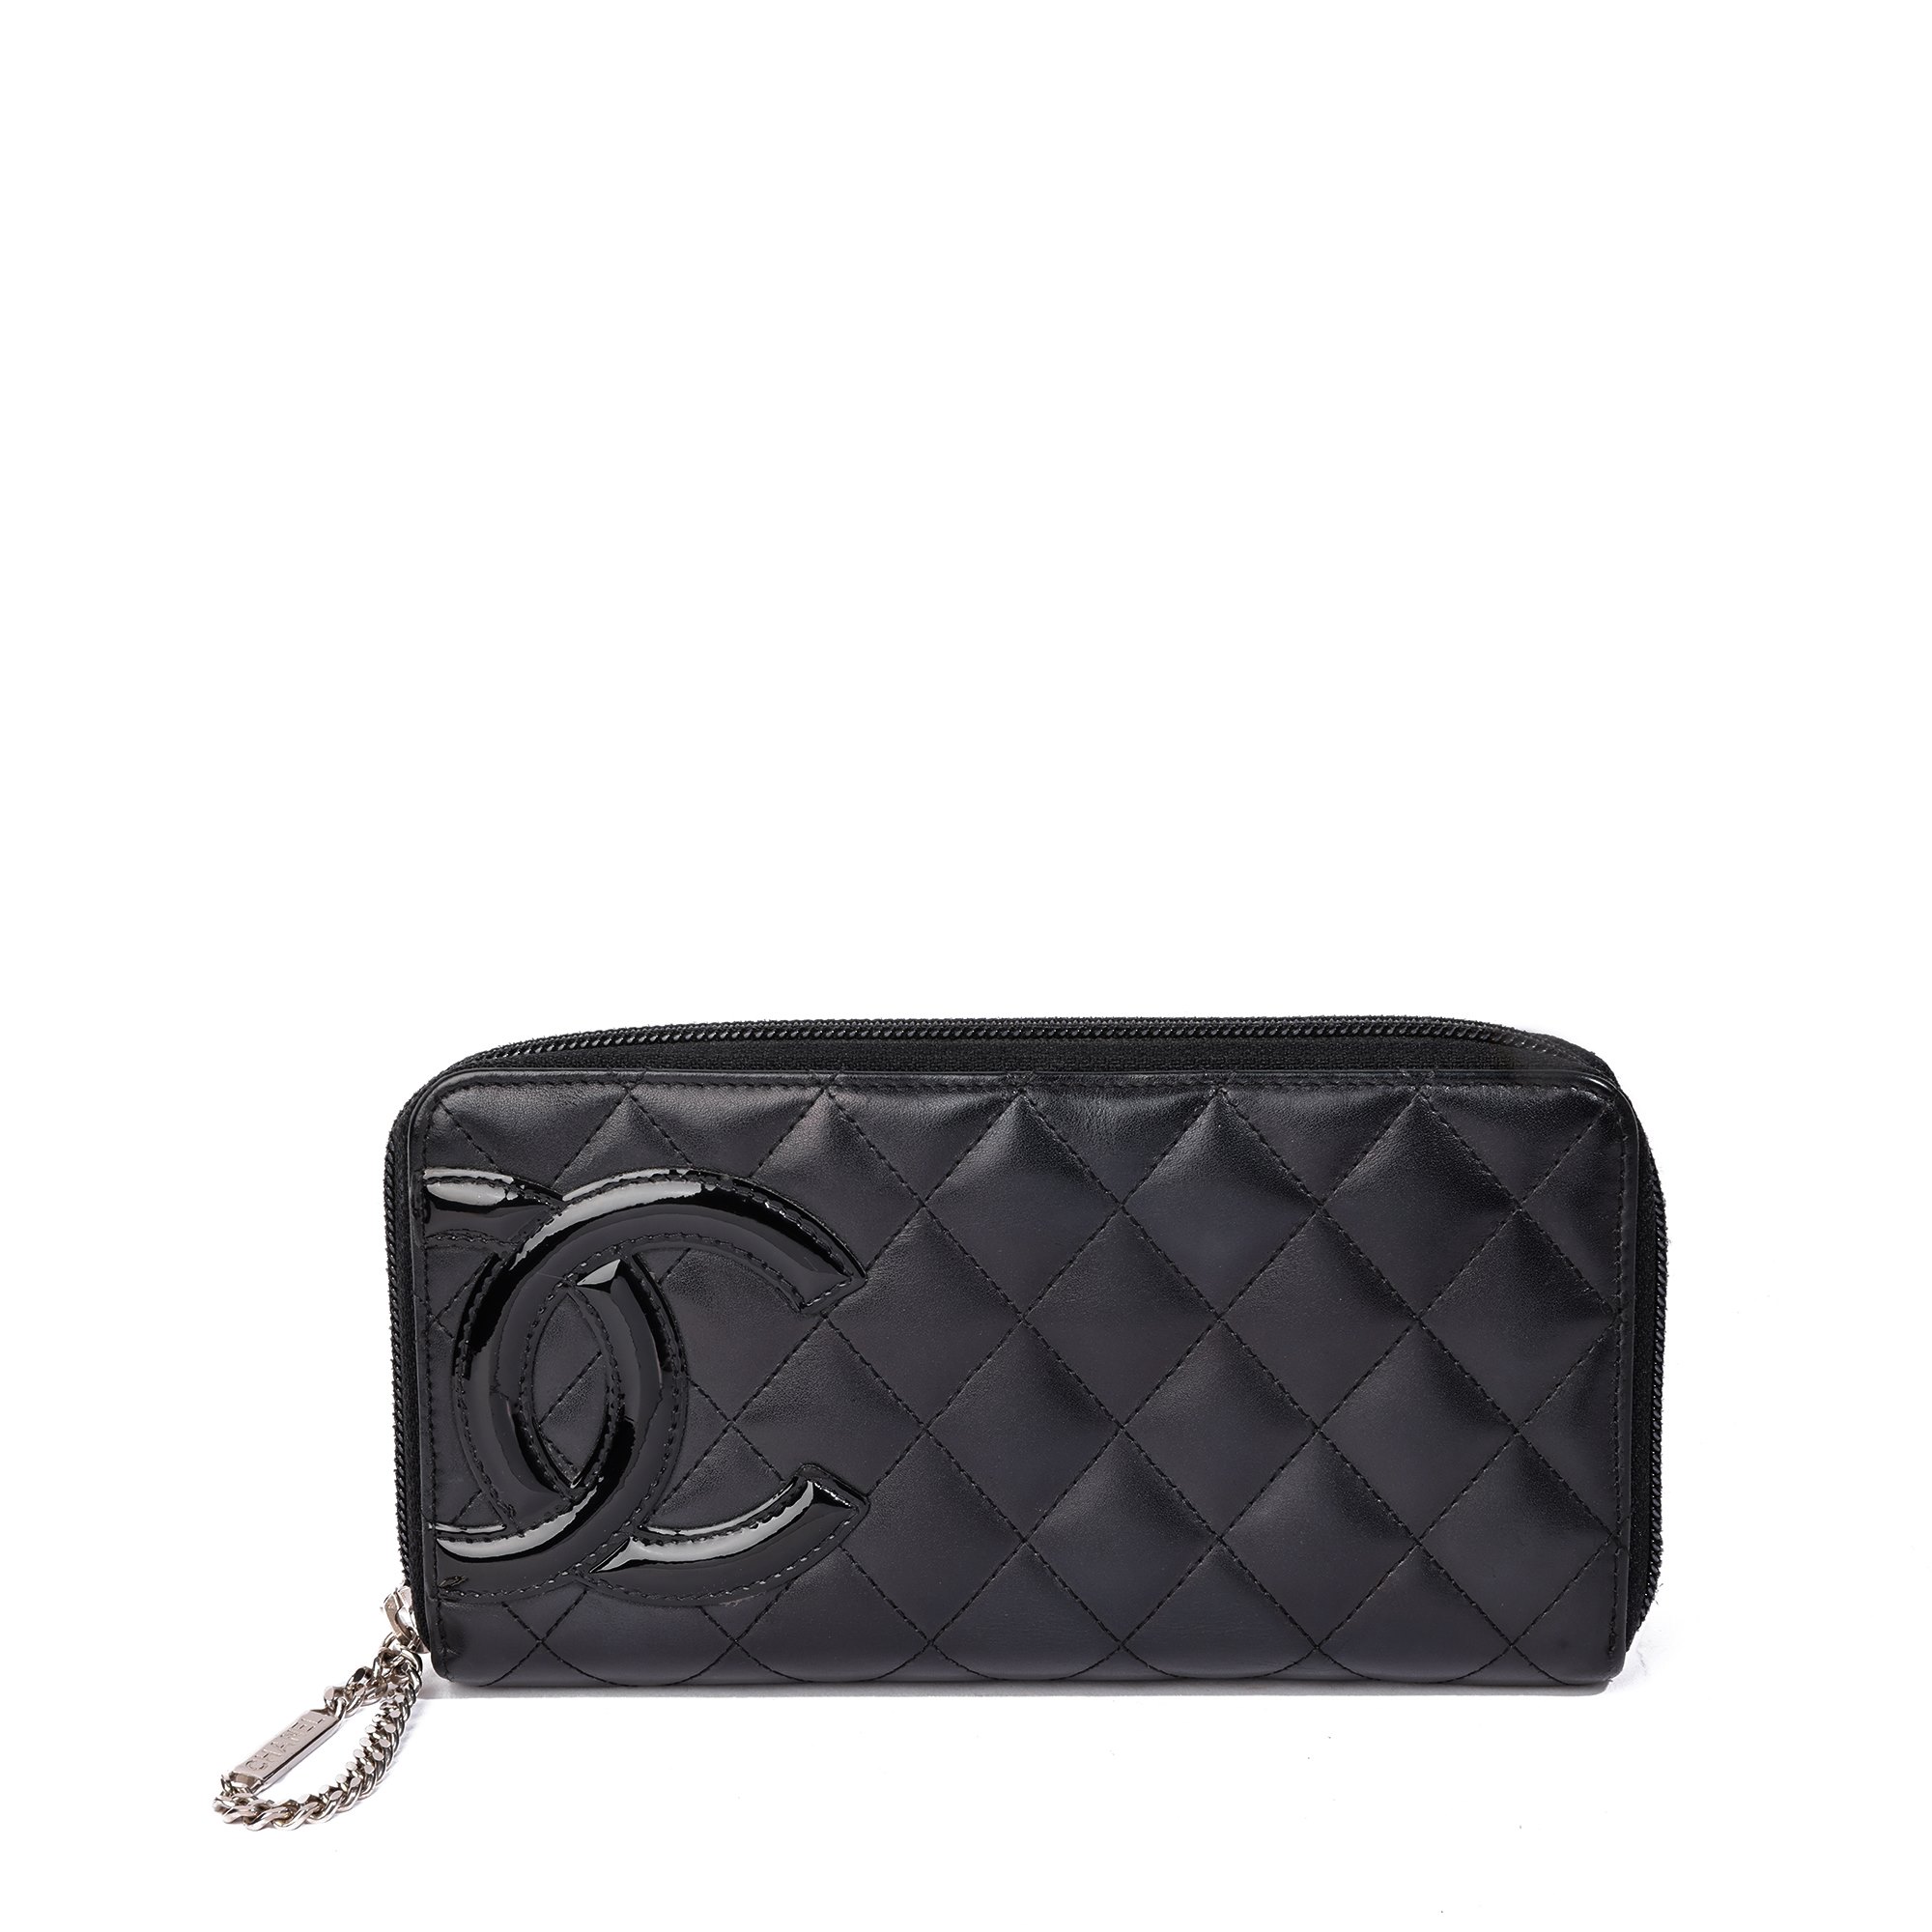 Chanel Black Quilted Lambskin & Patent Leather Ligne Cambon Long Wallet